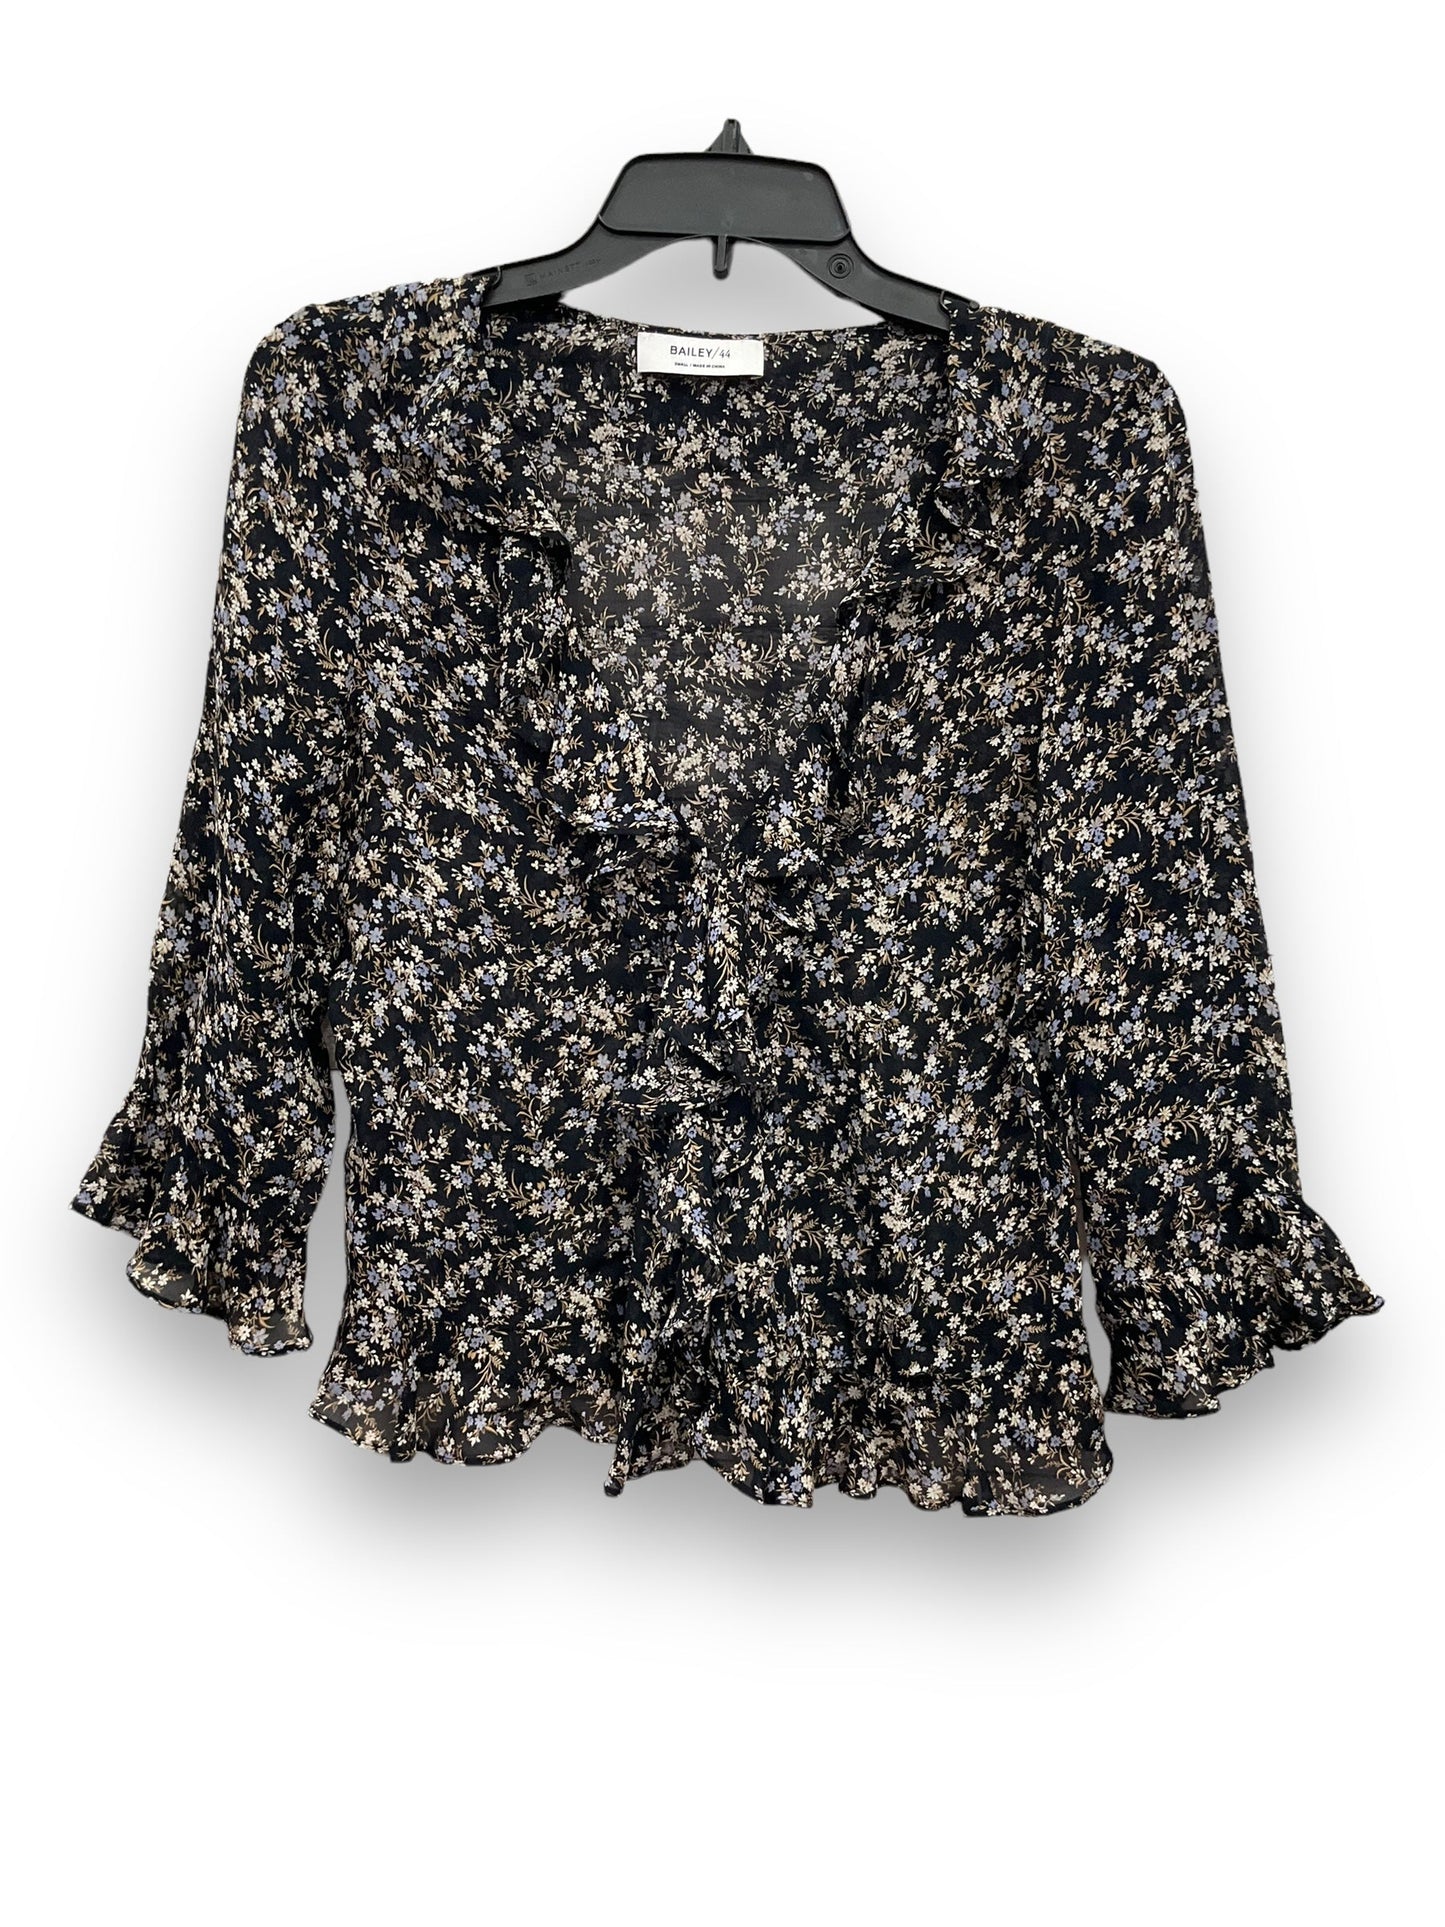 Floral Print Blouse 3/4 Sleeve Bailey 44, Size S